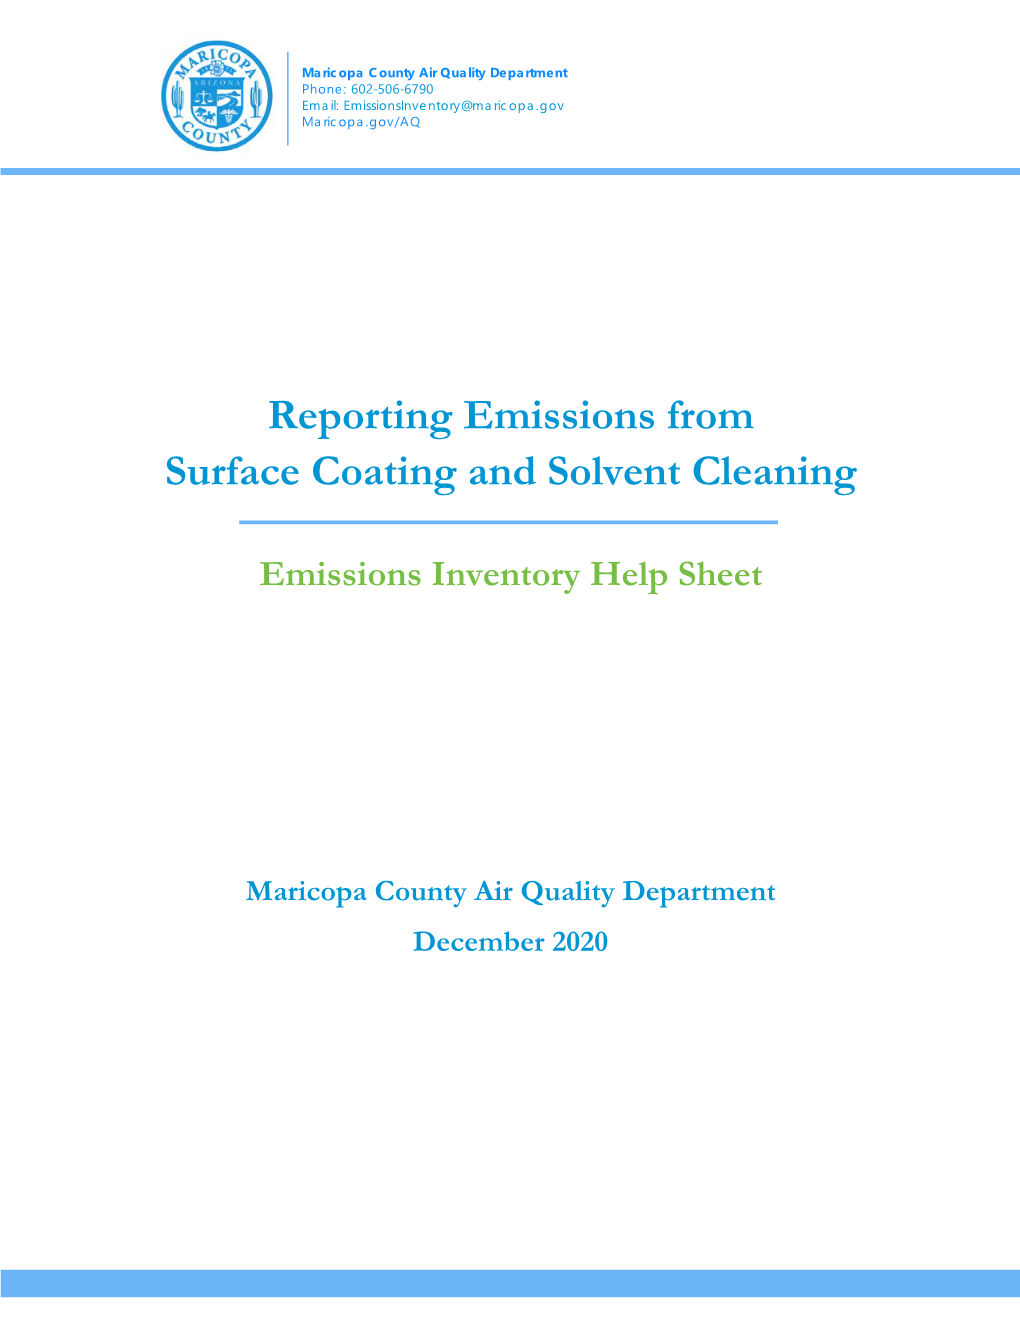 Reporting Emissions from Surface Coating and Solvent Cleaning